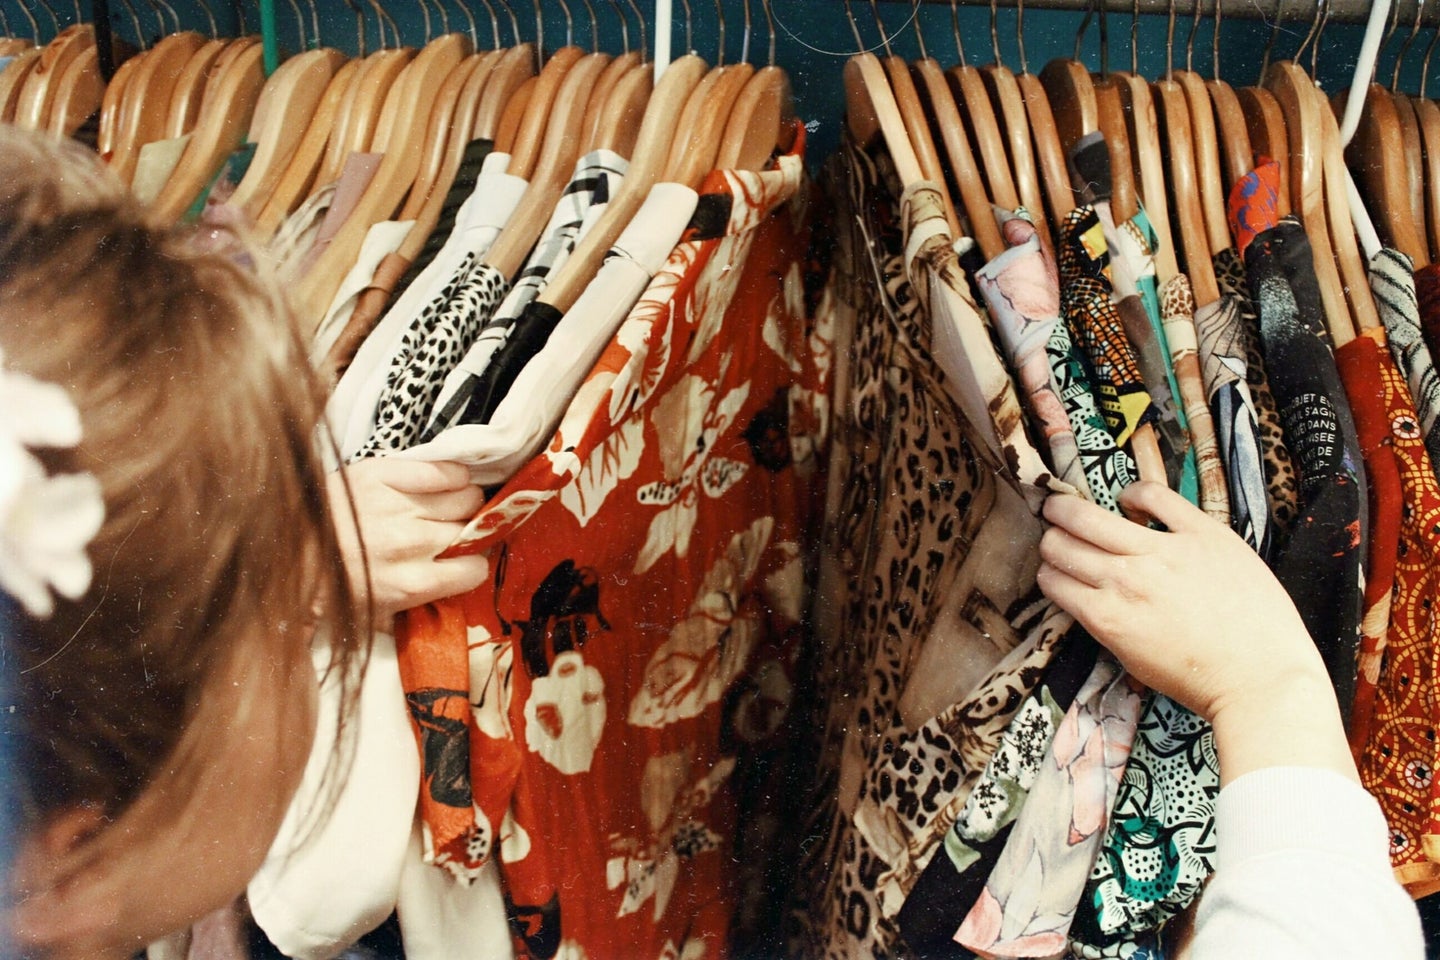 Woman searching through rack of vintage second-hand thrift clothing.